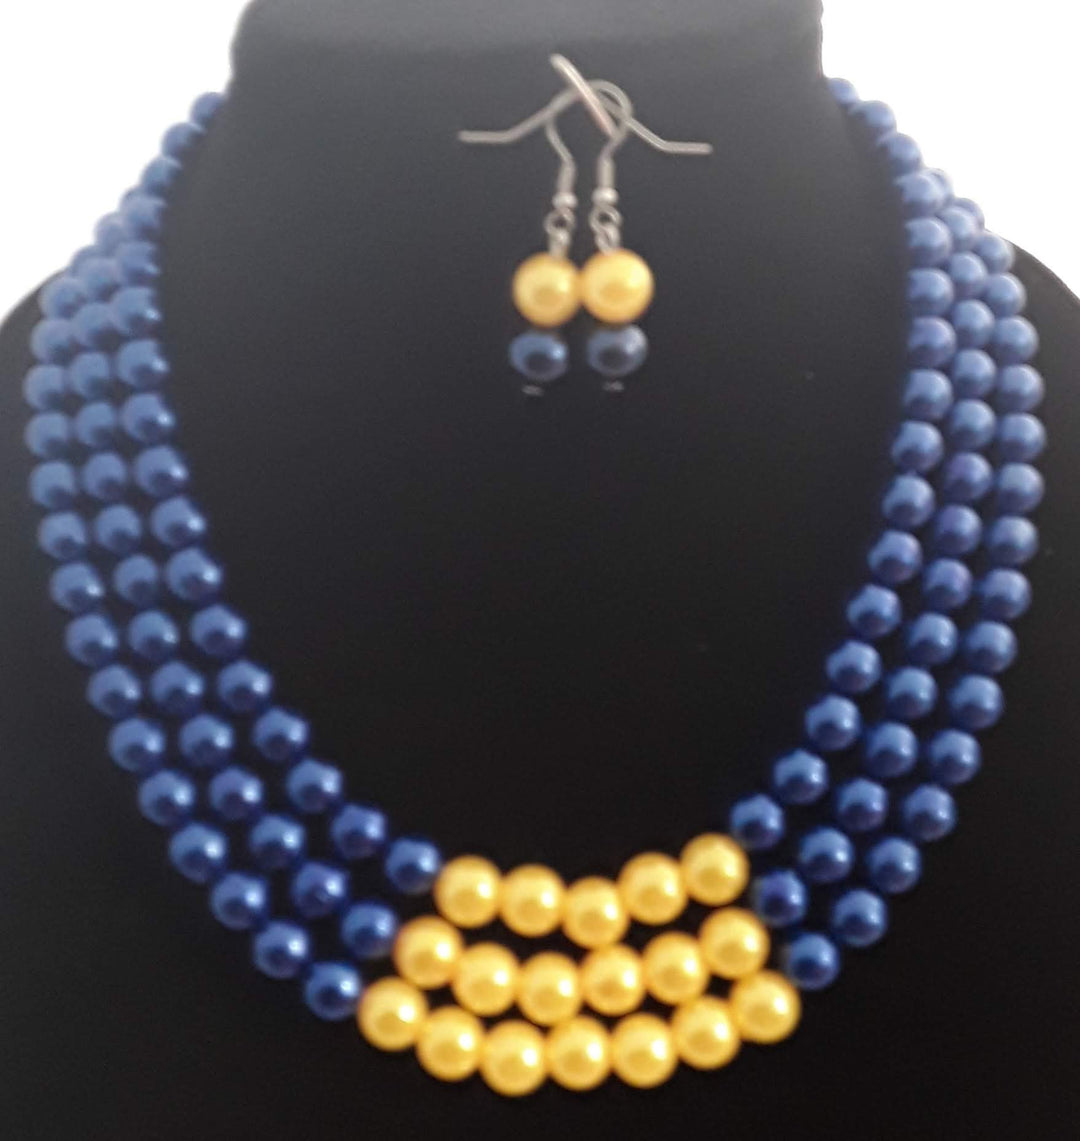 Classy 2 pc Blue/Yellow Triple Layered Sorority Pearl Necklace Set